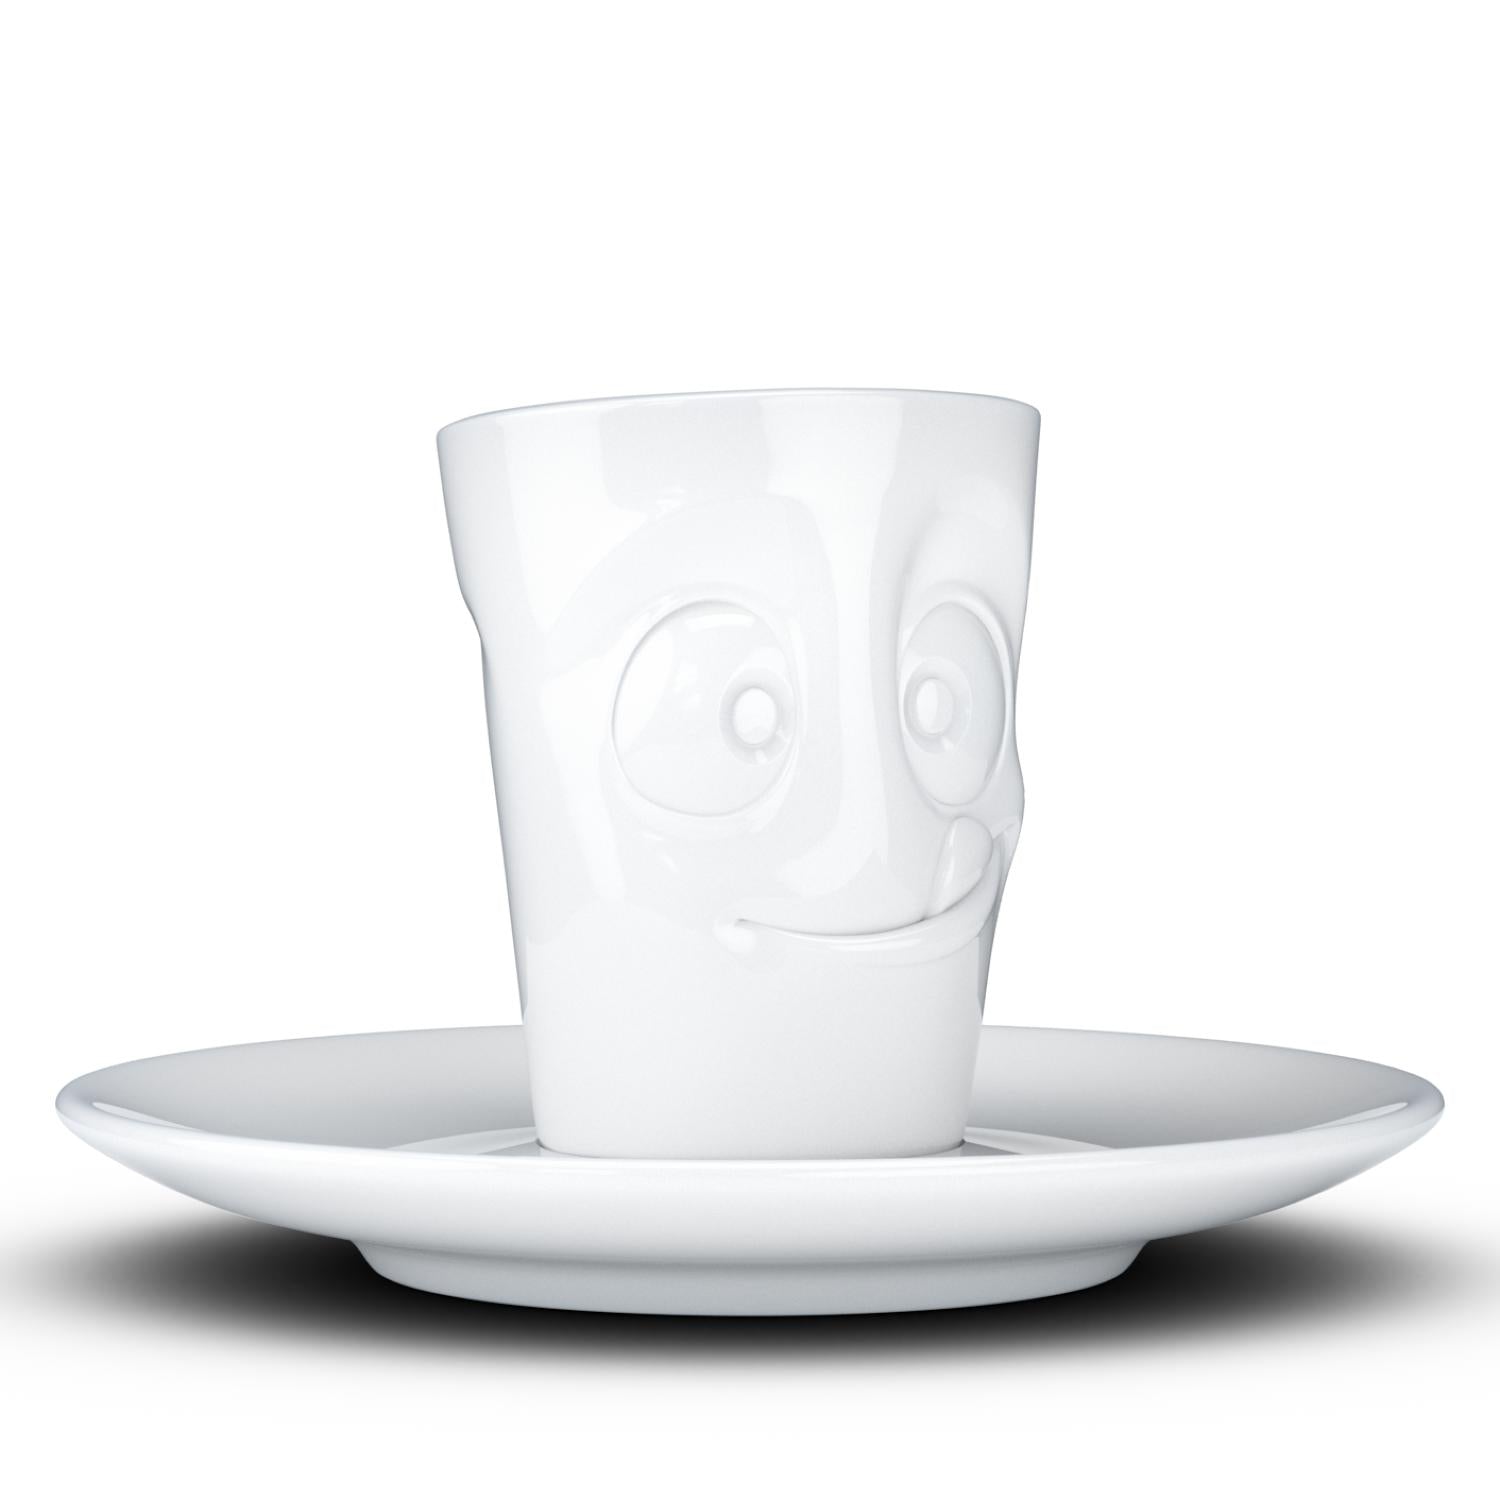 30 Tapered Personalized Espresso Cup Favors 3.5 Oz. I.T.I. Dover™ White  Porcelain After-dinner Cups, Demitasse, Mini Mugs 